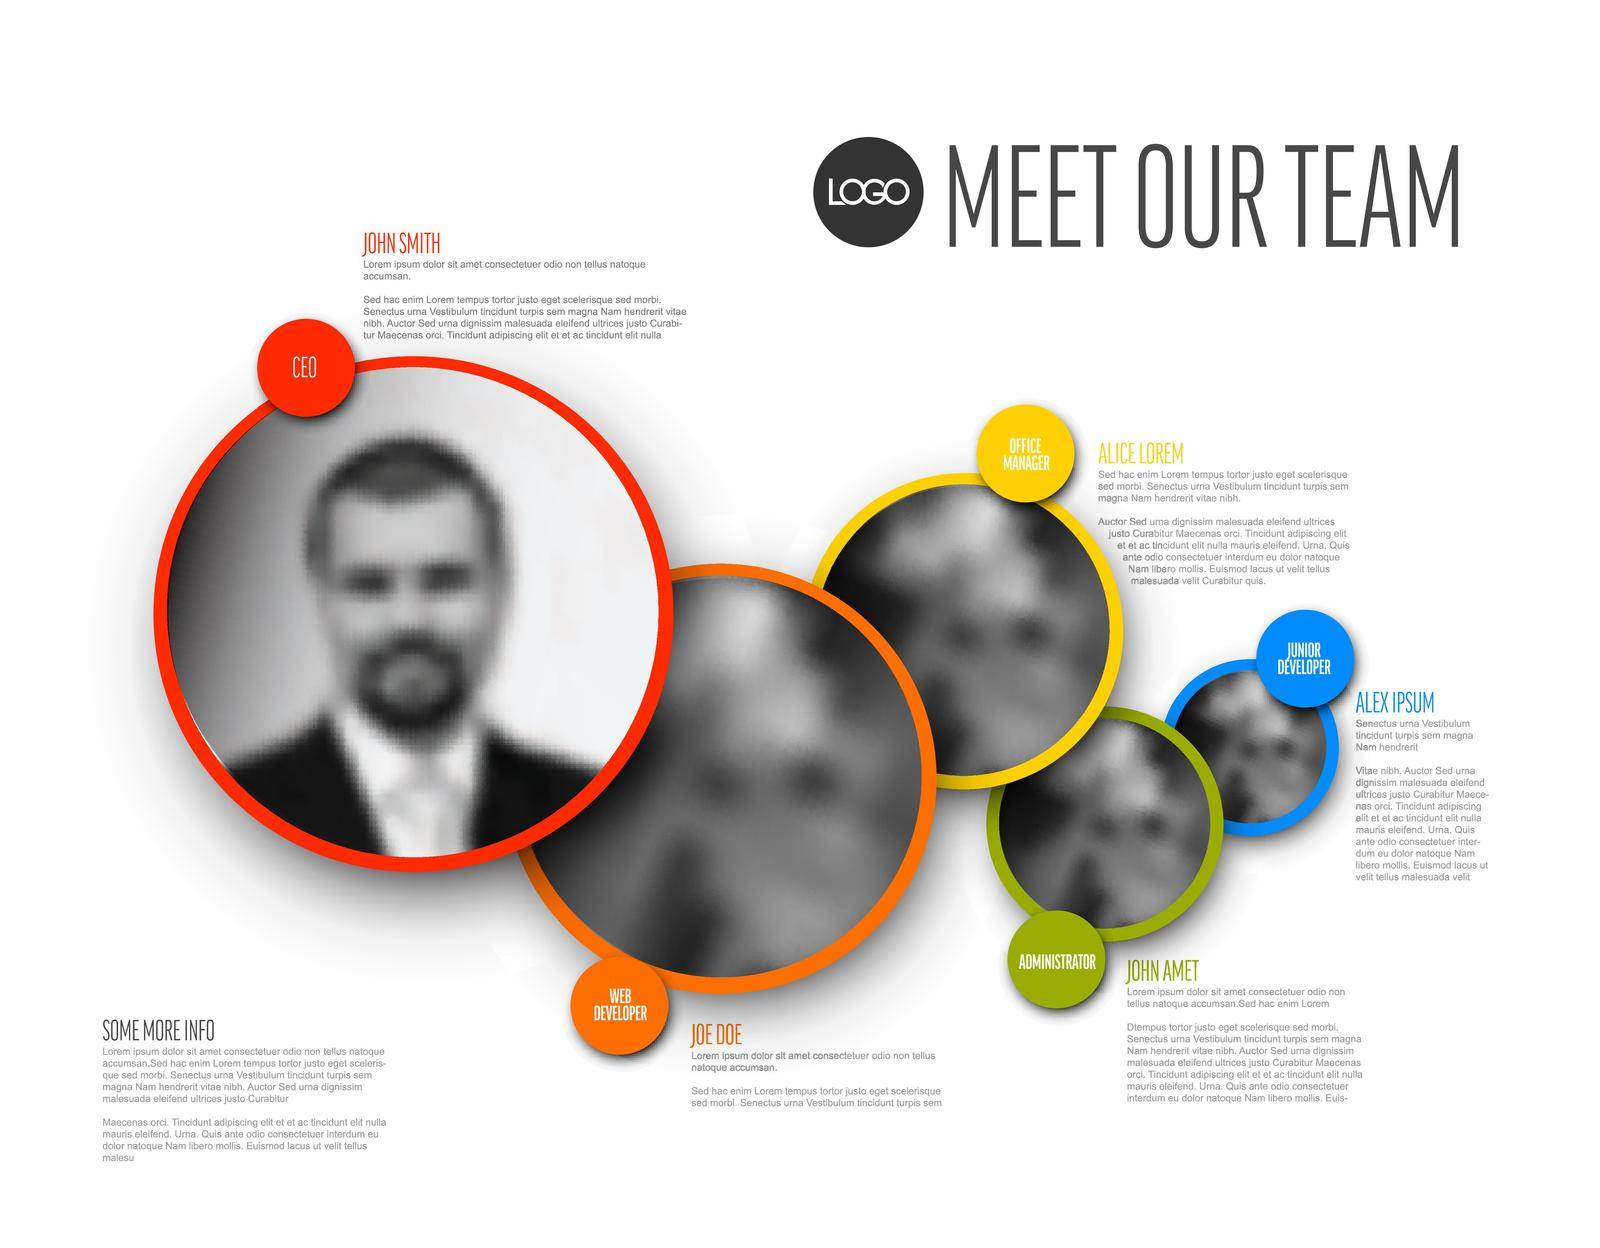 Company team presentation template with team profile photos circle placeholders with some sample text about each team member - photo team members placeholders with descriptions